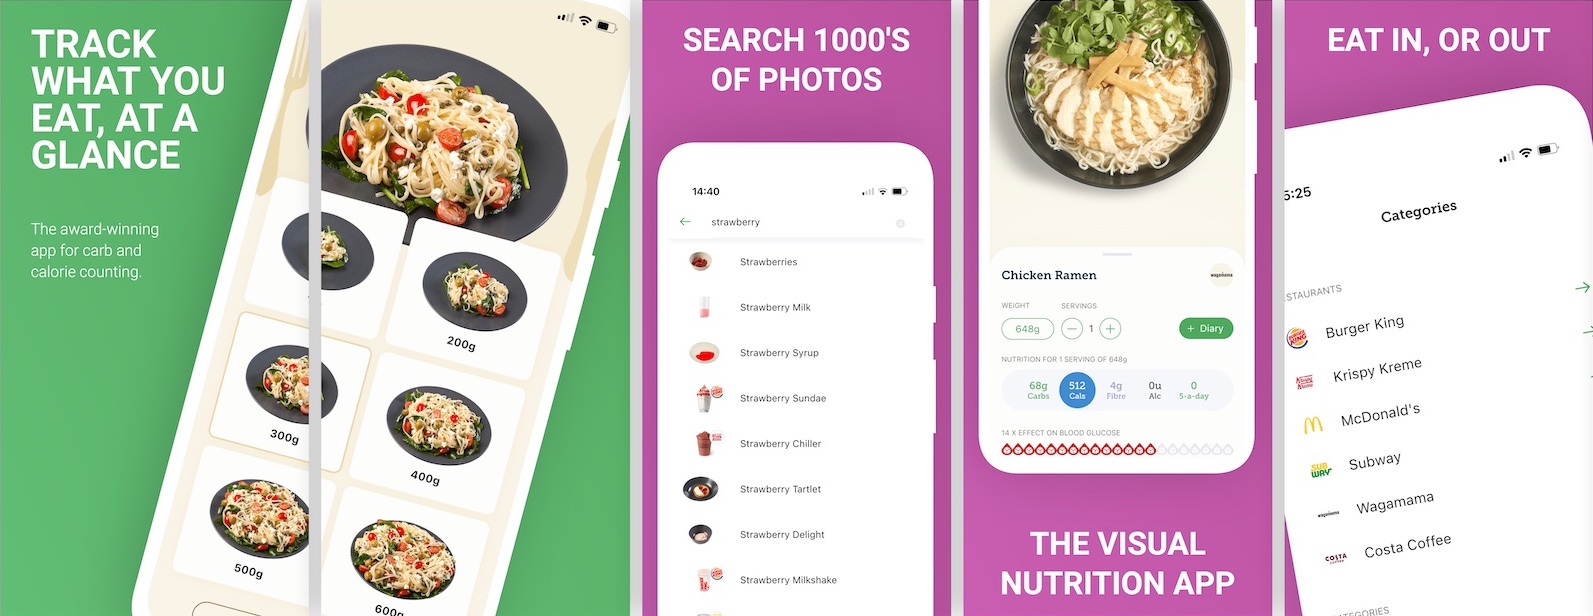 Carbs & Cals has quality app store images